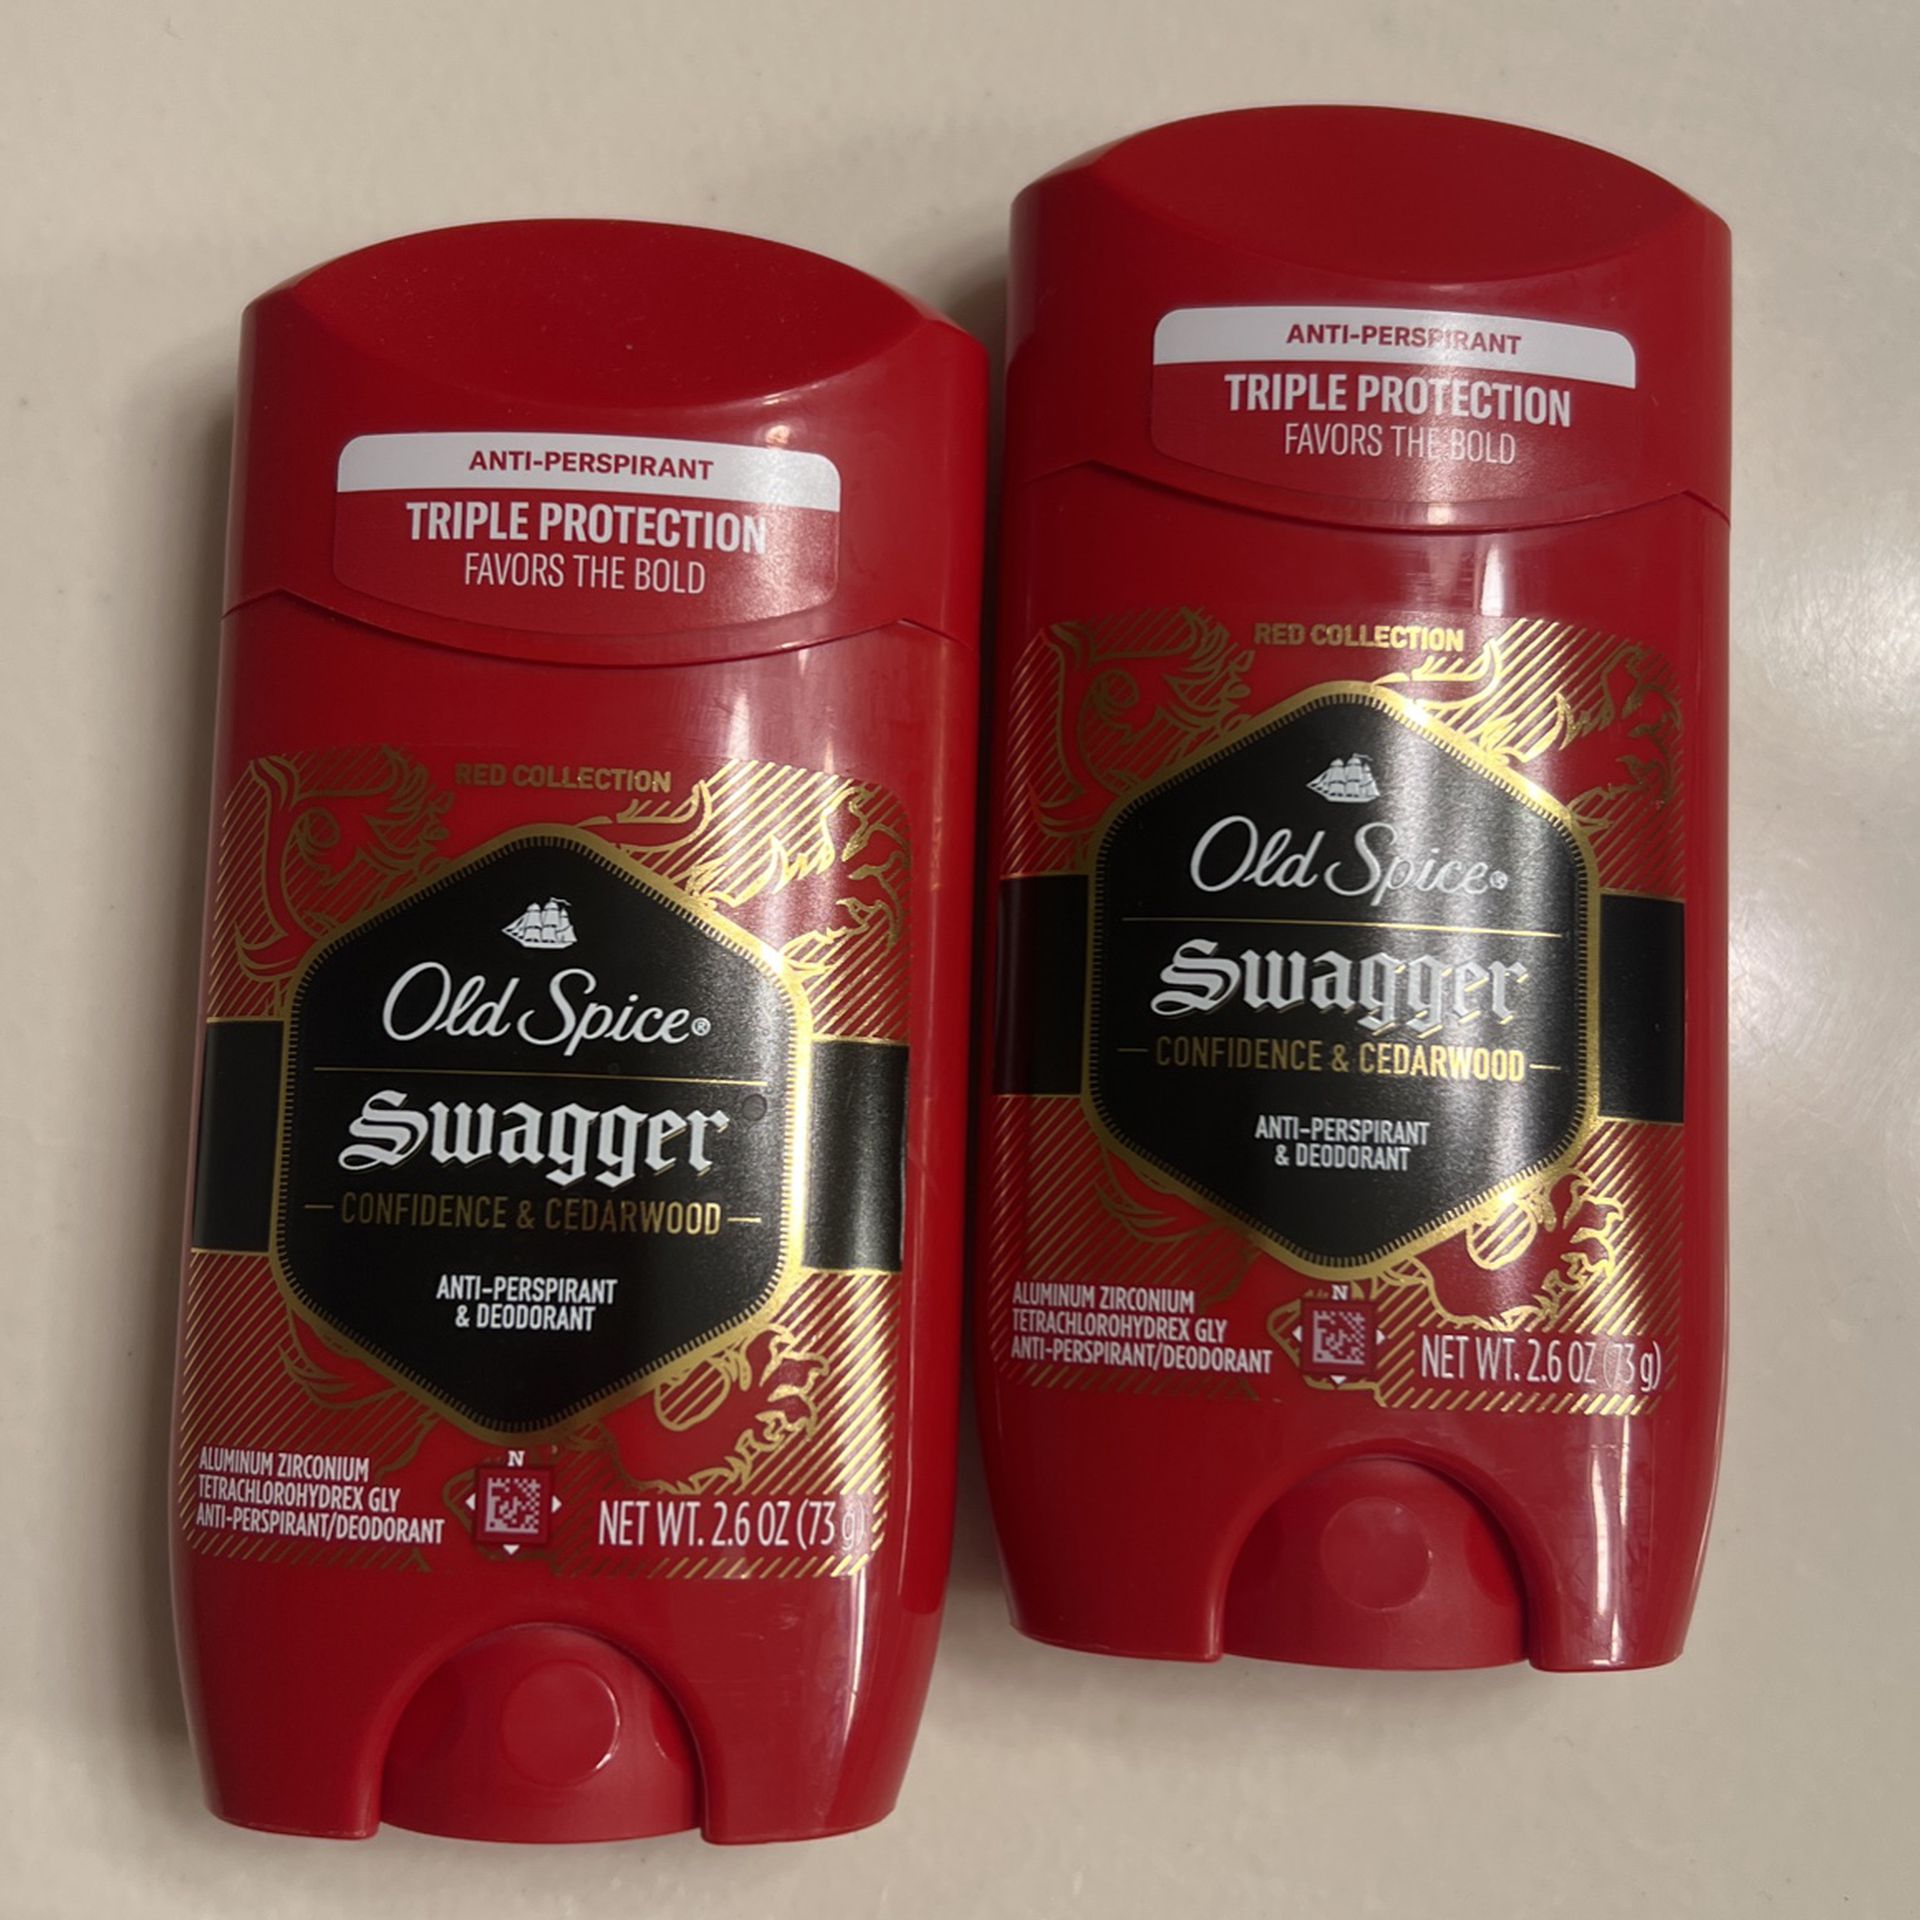 Old Spice Swagger 